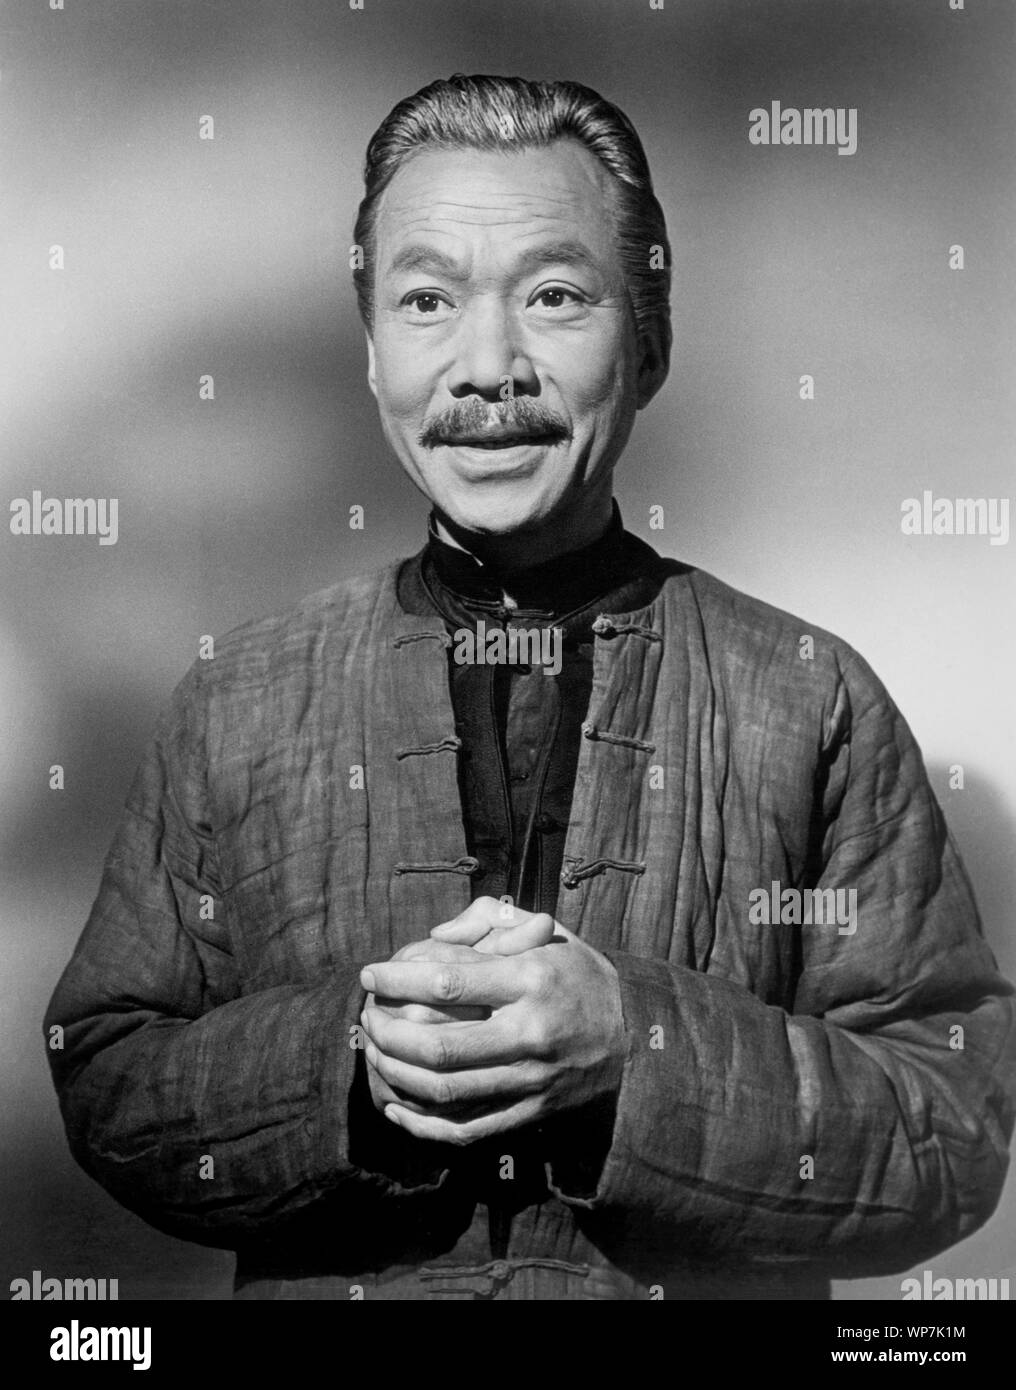 Kam Tong, Publicity Portrait for the Film, "Flower Drum Song", Universal Pictures, 1961 Stock Photo